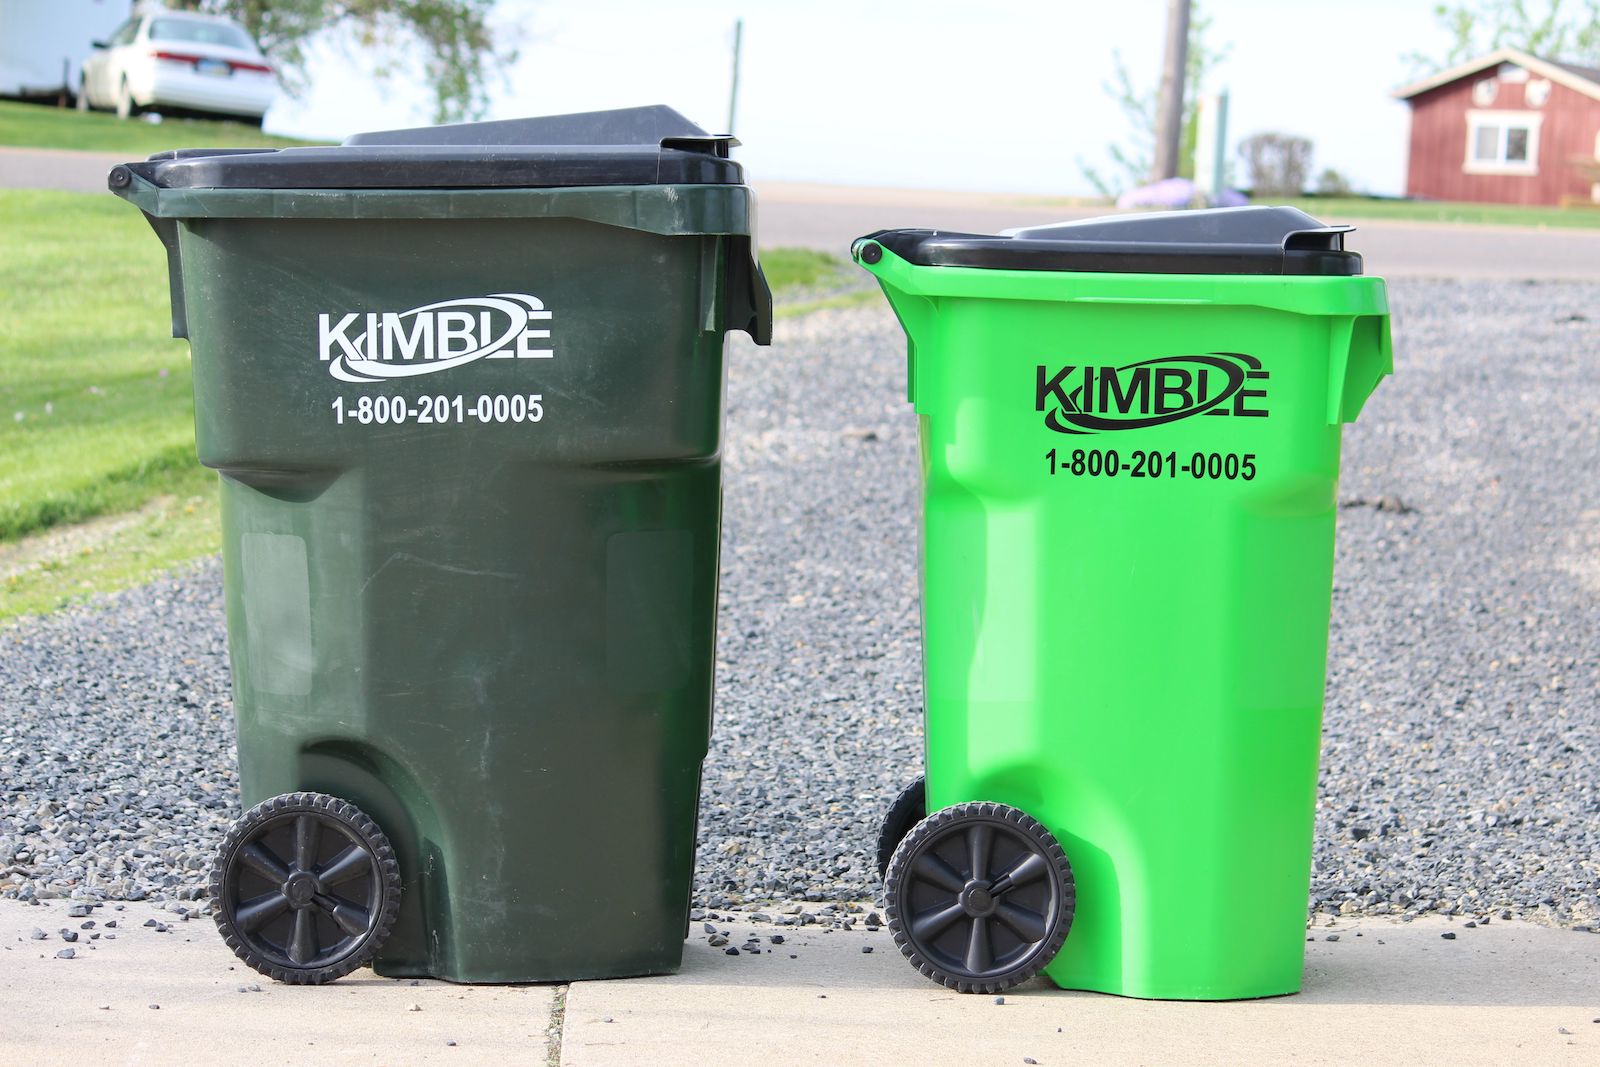 Recyclable items in Kimble's recycling cans